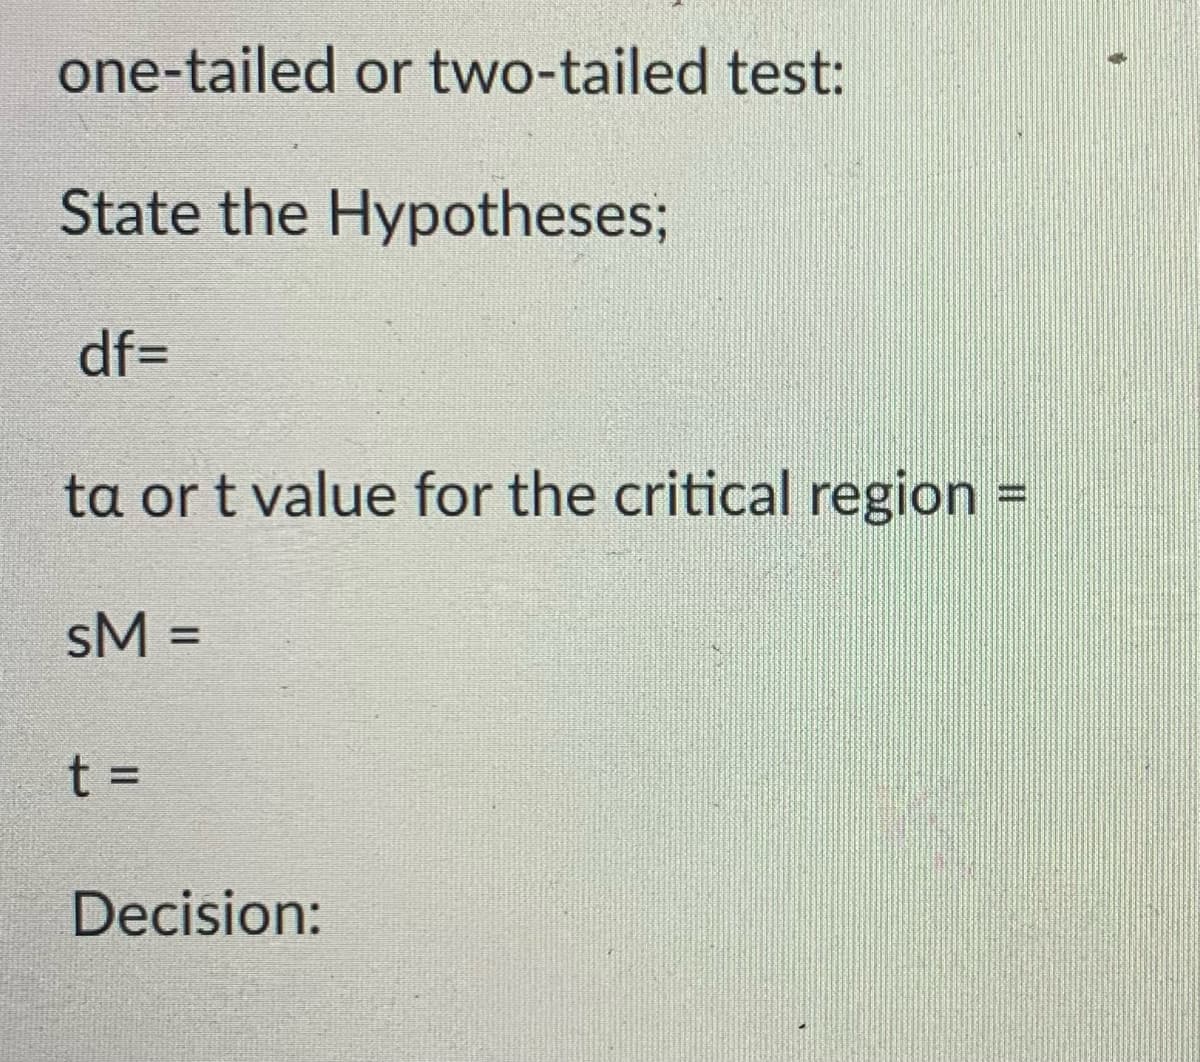 one-tailed or two-tailed test:
State the Hypotheses;
df=
ta or t value for the critical region
sM =
%3D
t D
Decision:
